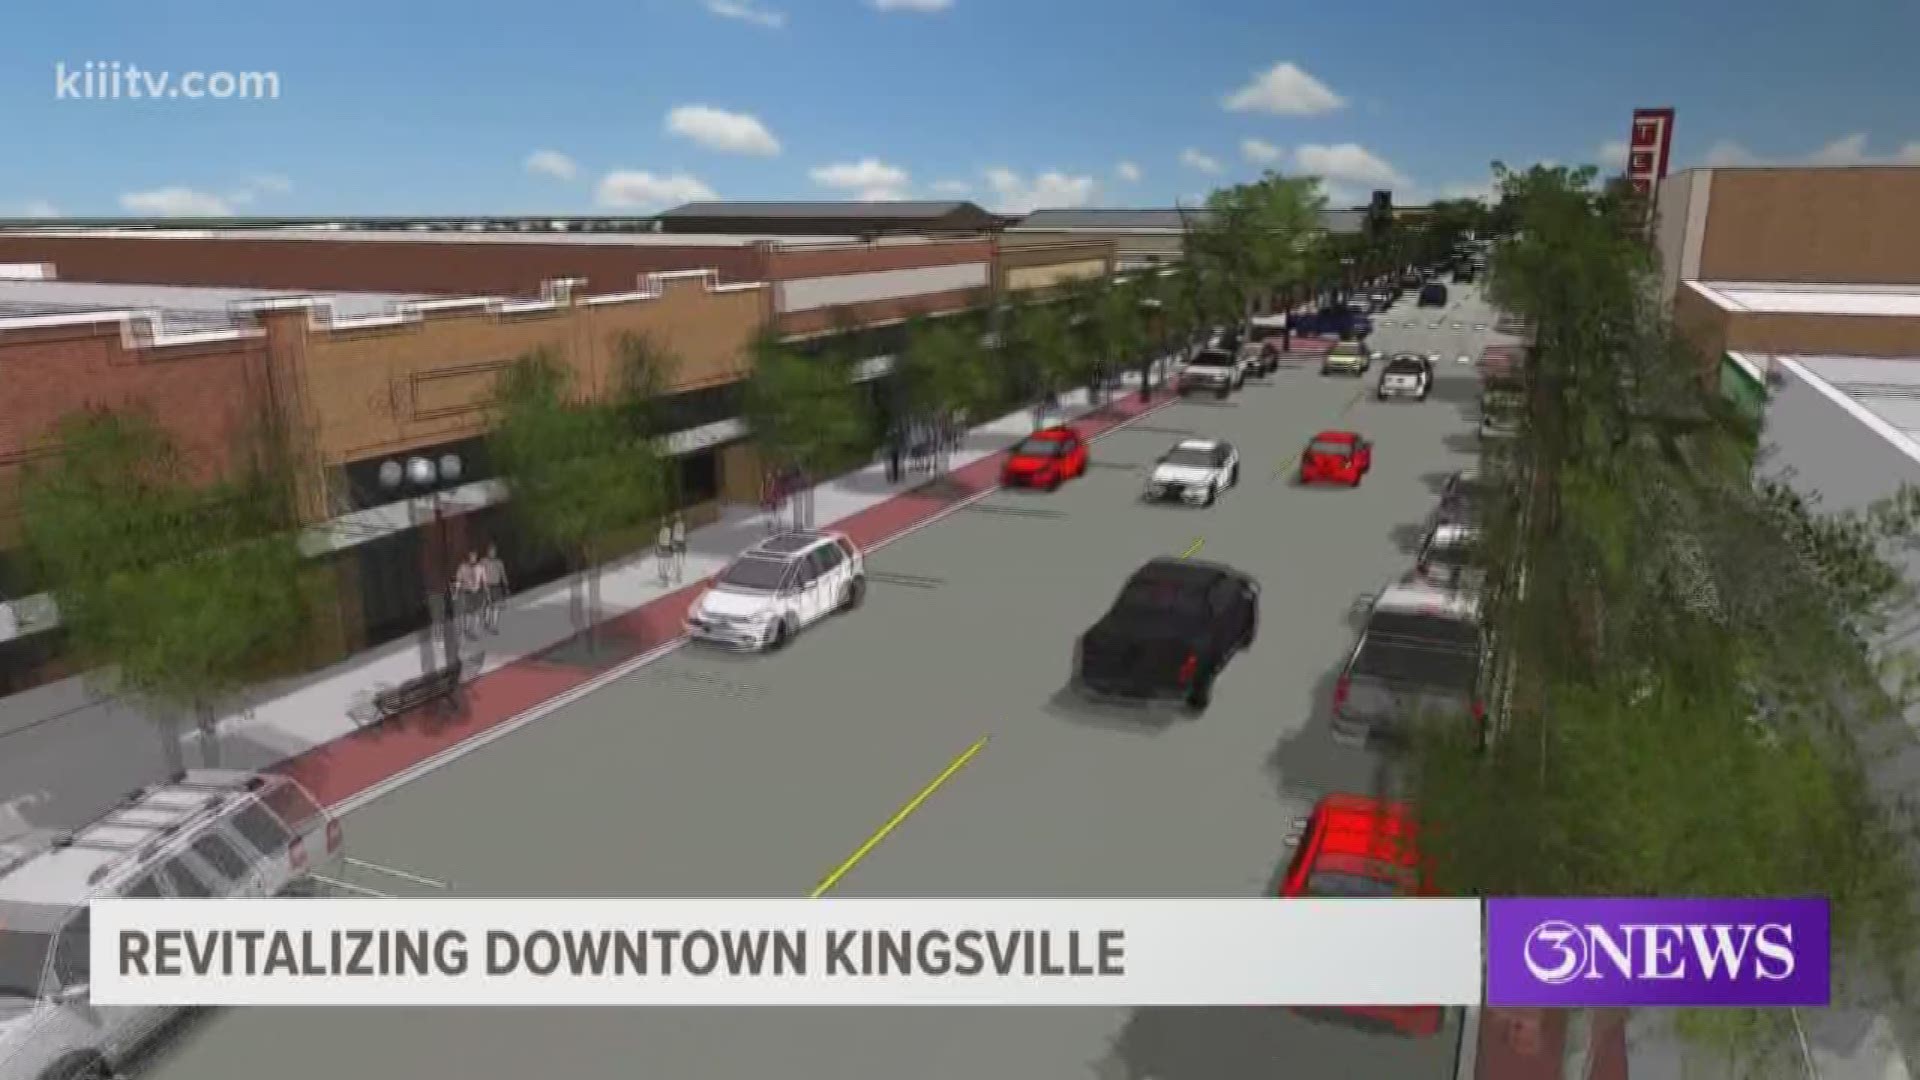 The City of Kingsville is revitalizing its downtown area and will see significant changes.